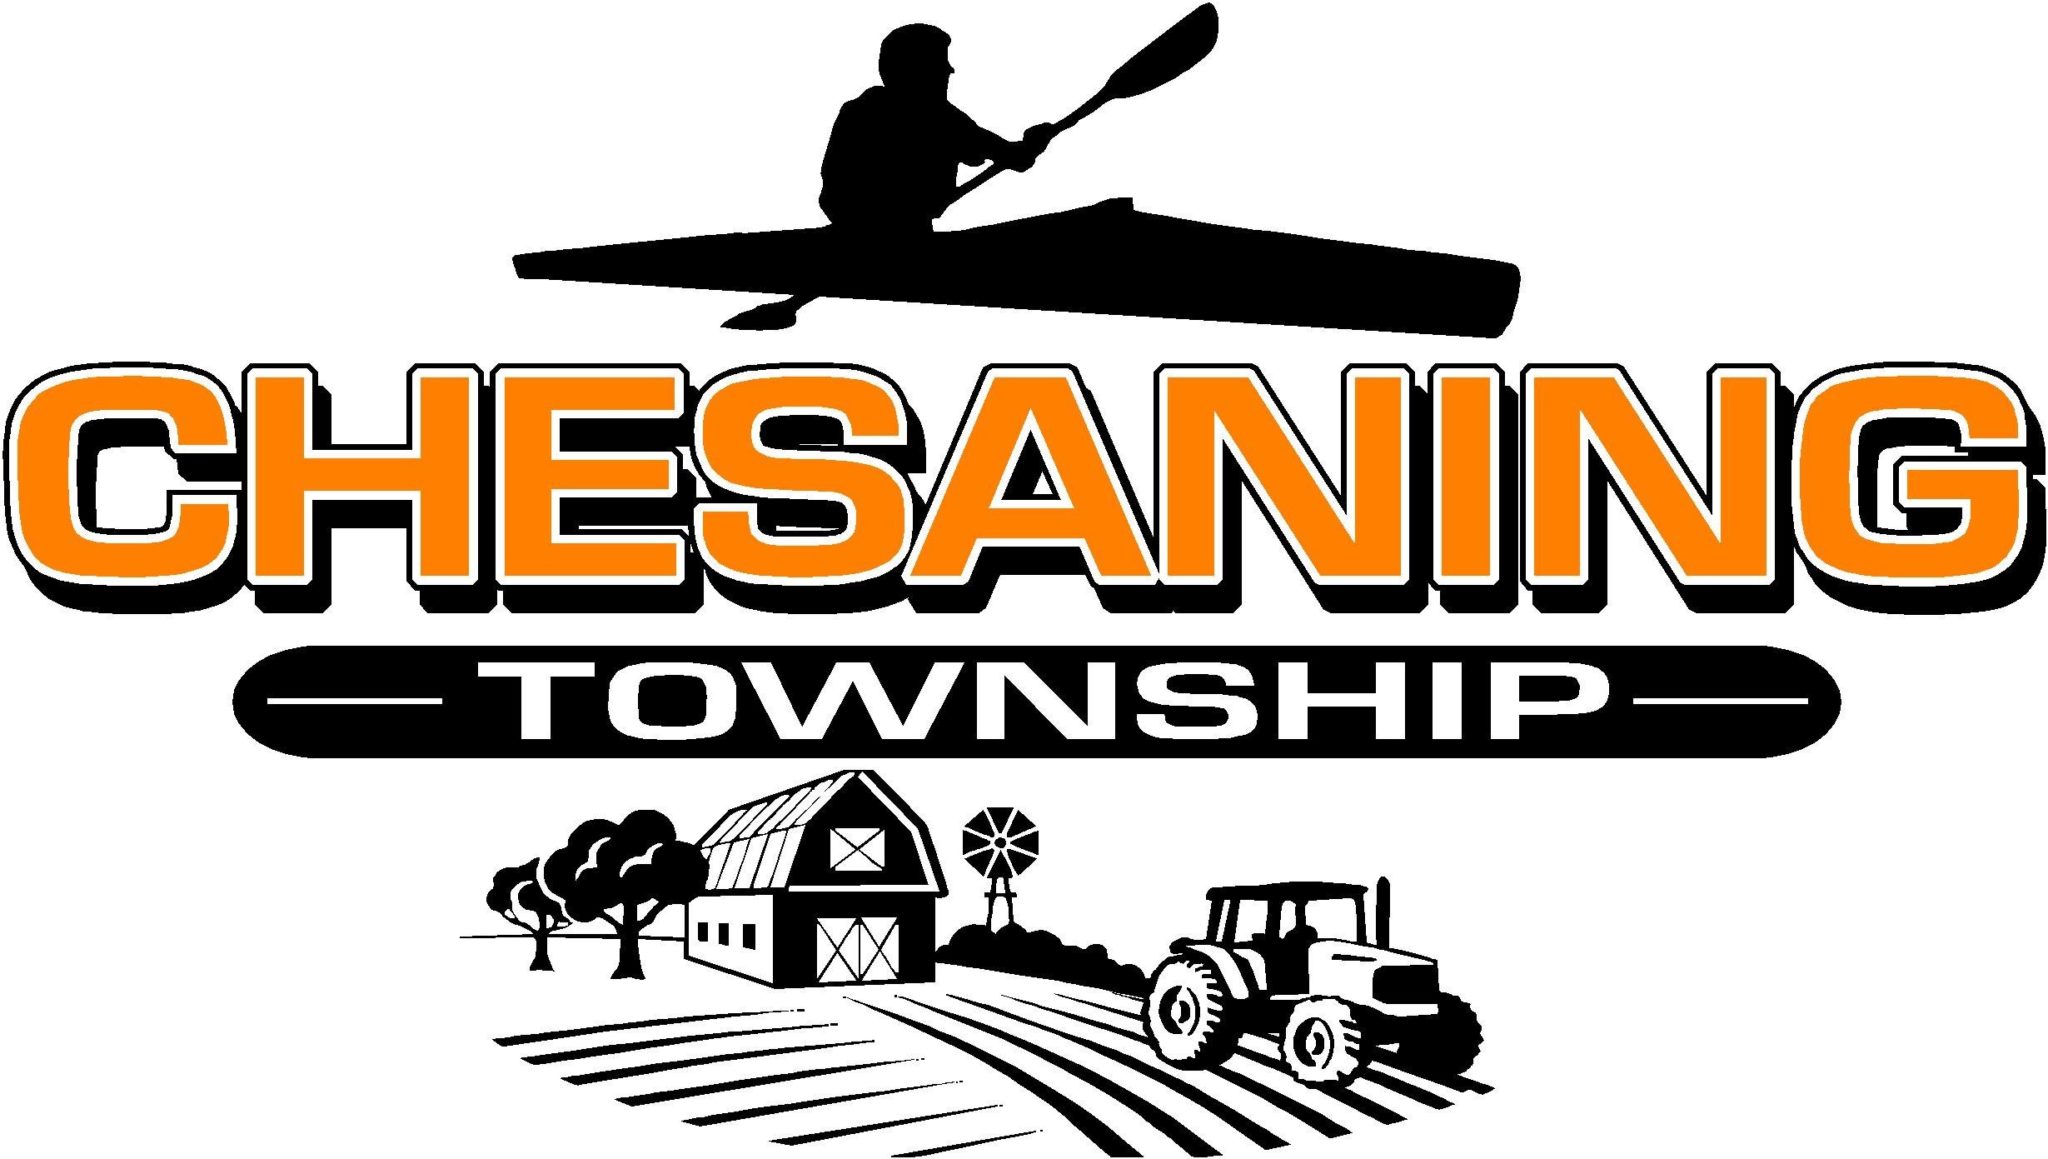 $500 - Chesaning Township's Image